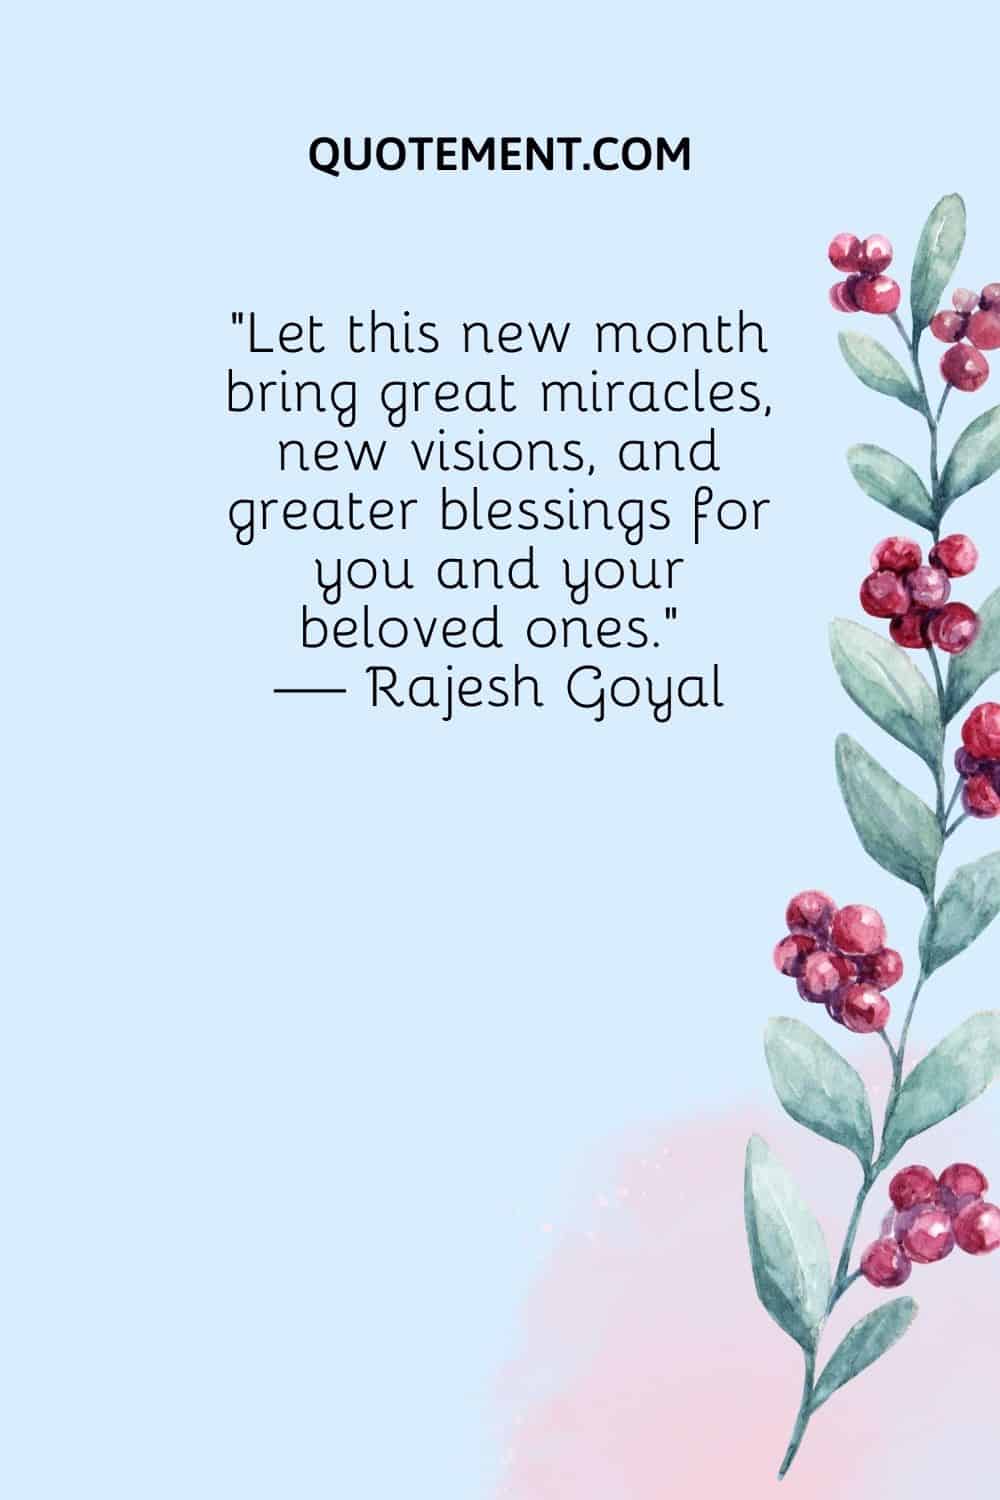 “Let this new month bring great miracles, new visions, and greater blessings for you and your beloved ones.” — Rajesh Goyal